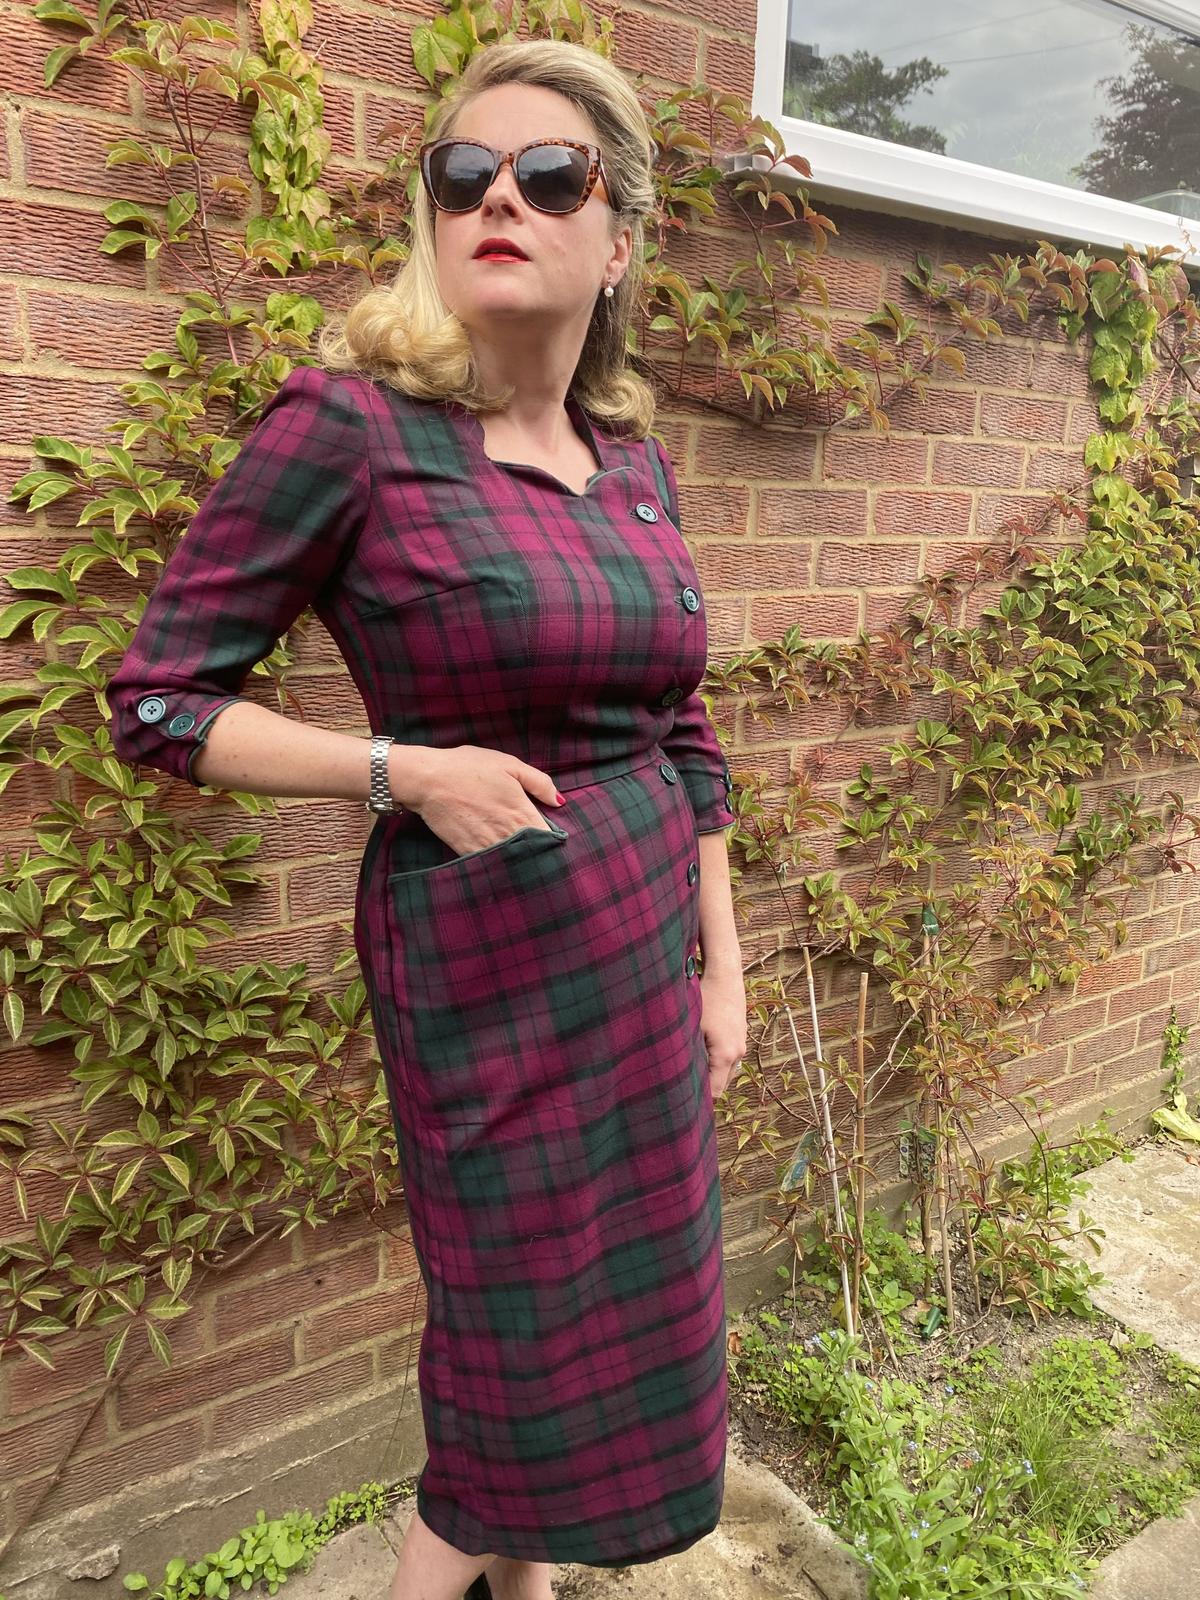 Rosie wearing a handmade tartan dress made from a vintage Simplicity pattern. (Kennedy News and Media)